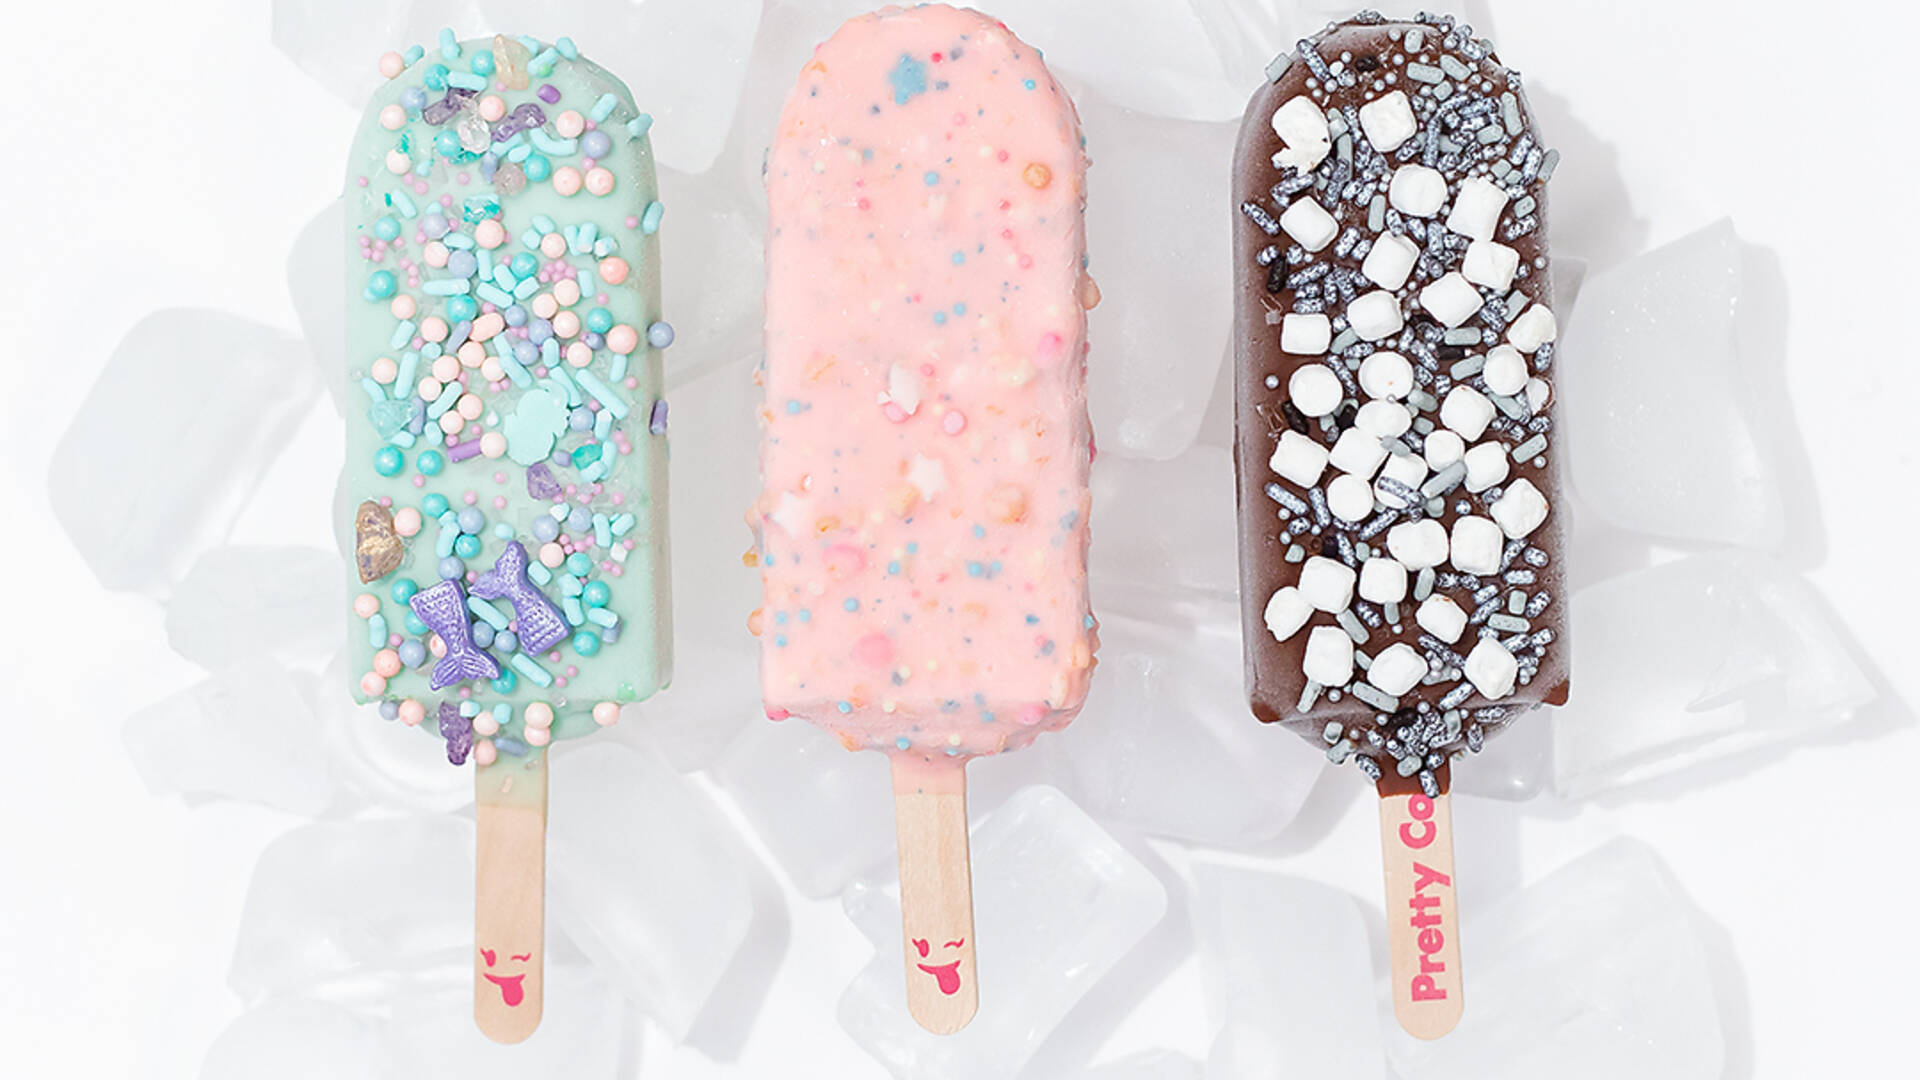 Pusheen + Pretty Cool Ice Cream pop-up | Things to do in Chicago